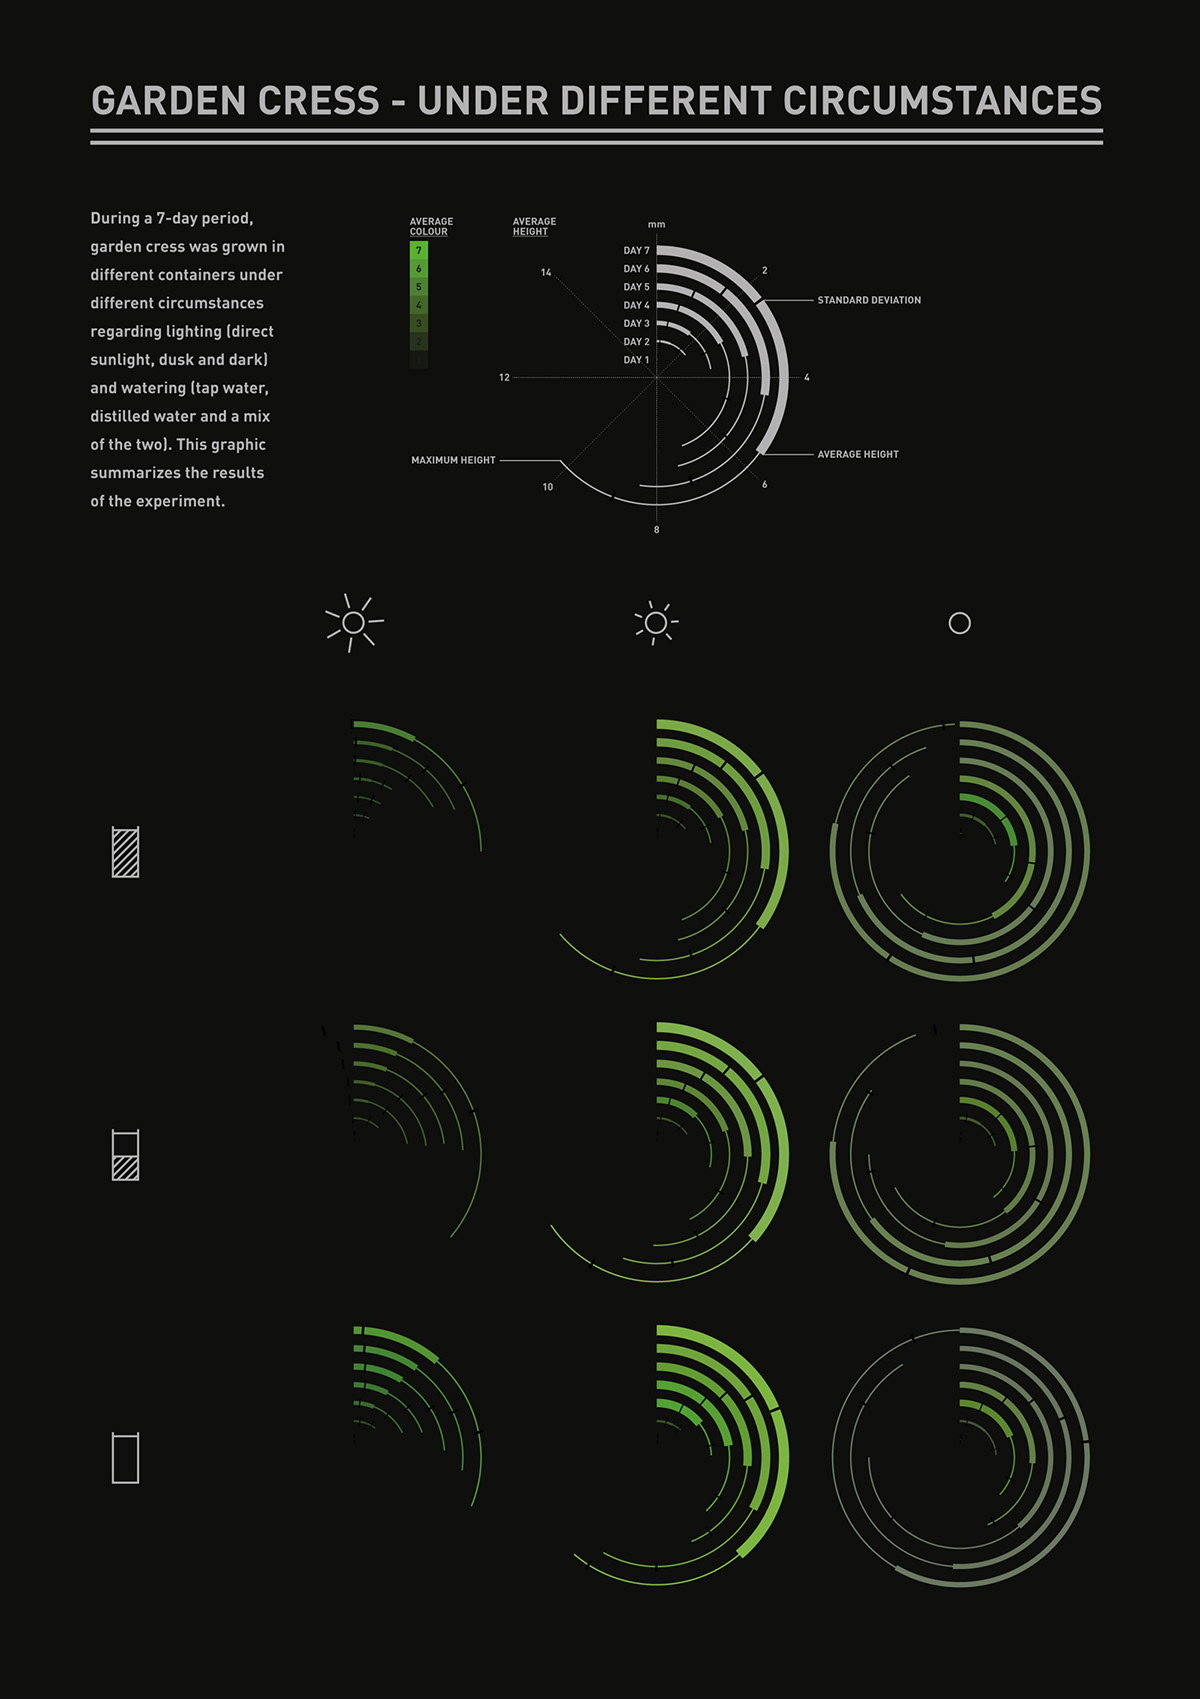 visualisation datavisualisation visualization DATAVISUALIZATION processing Excel Data garden cress growth circumstances infographic information graphic generative generative design process